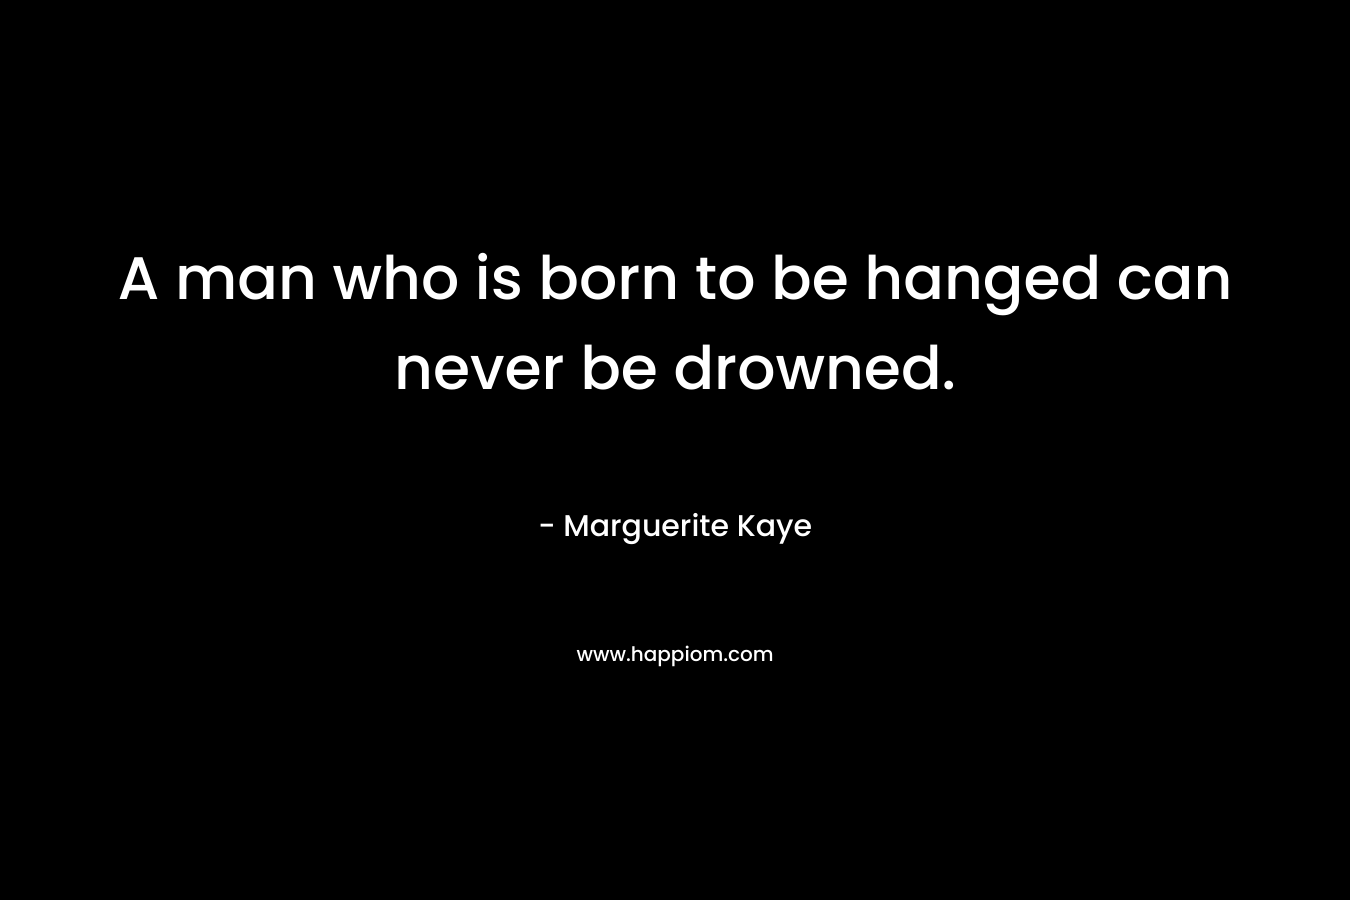 A man who is born to be hanged can never be drowned. – Marguerite Kaye